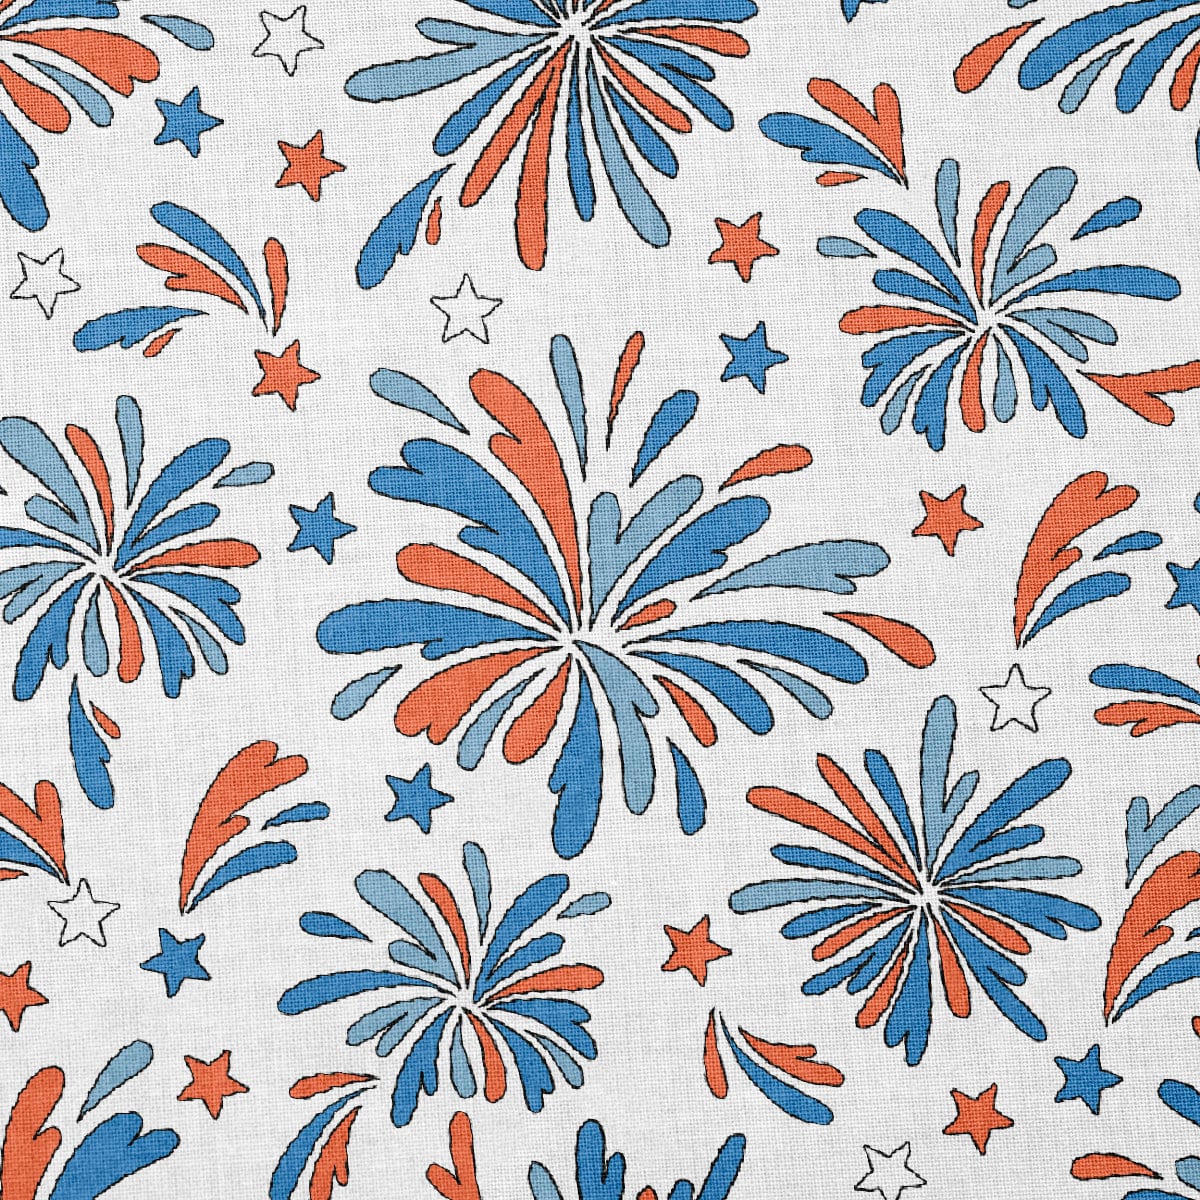 100% Cotton Fabric By the Yard Printed in USA Cotton Sateen -  Cotton  CTN2178 4th of July Patriotic